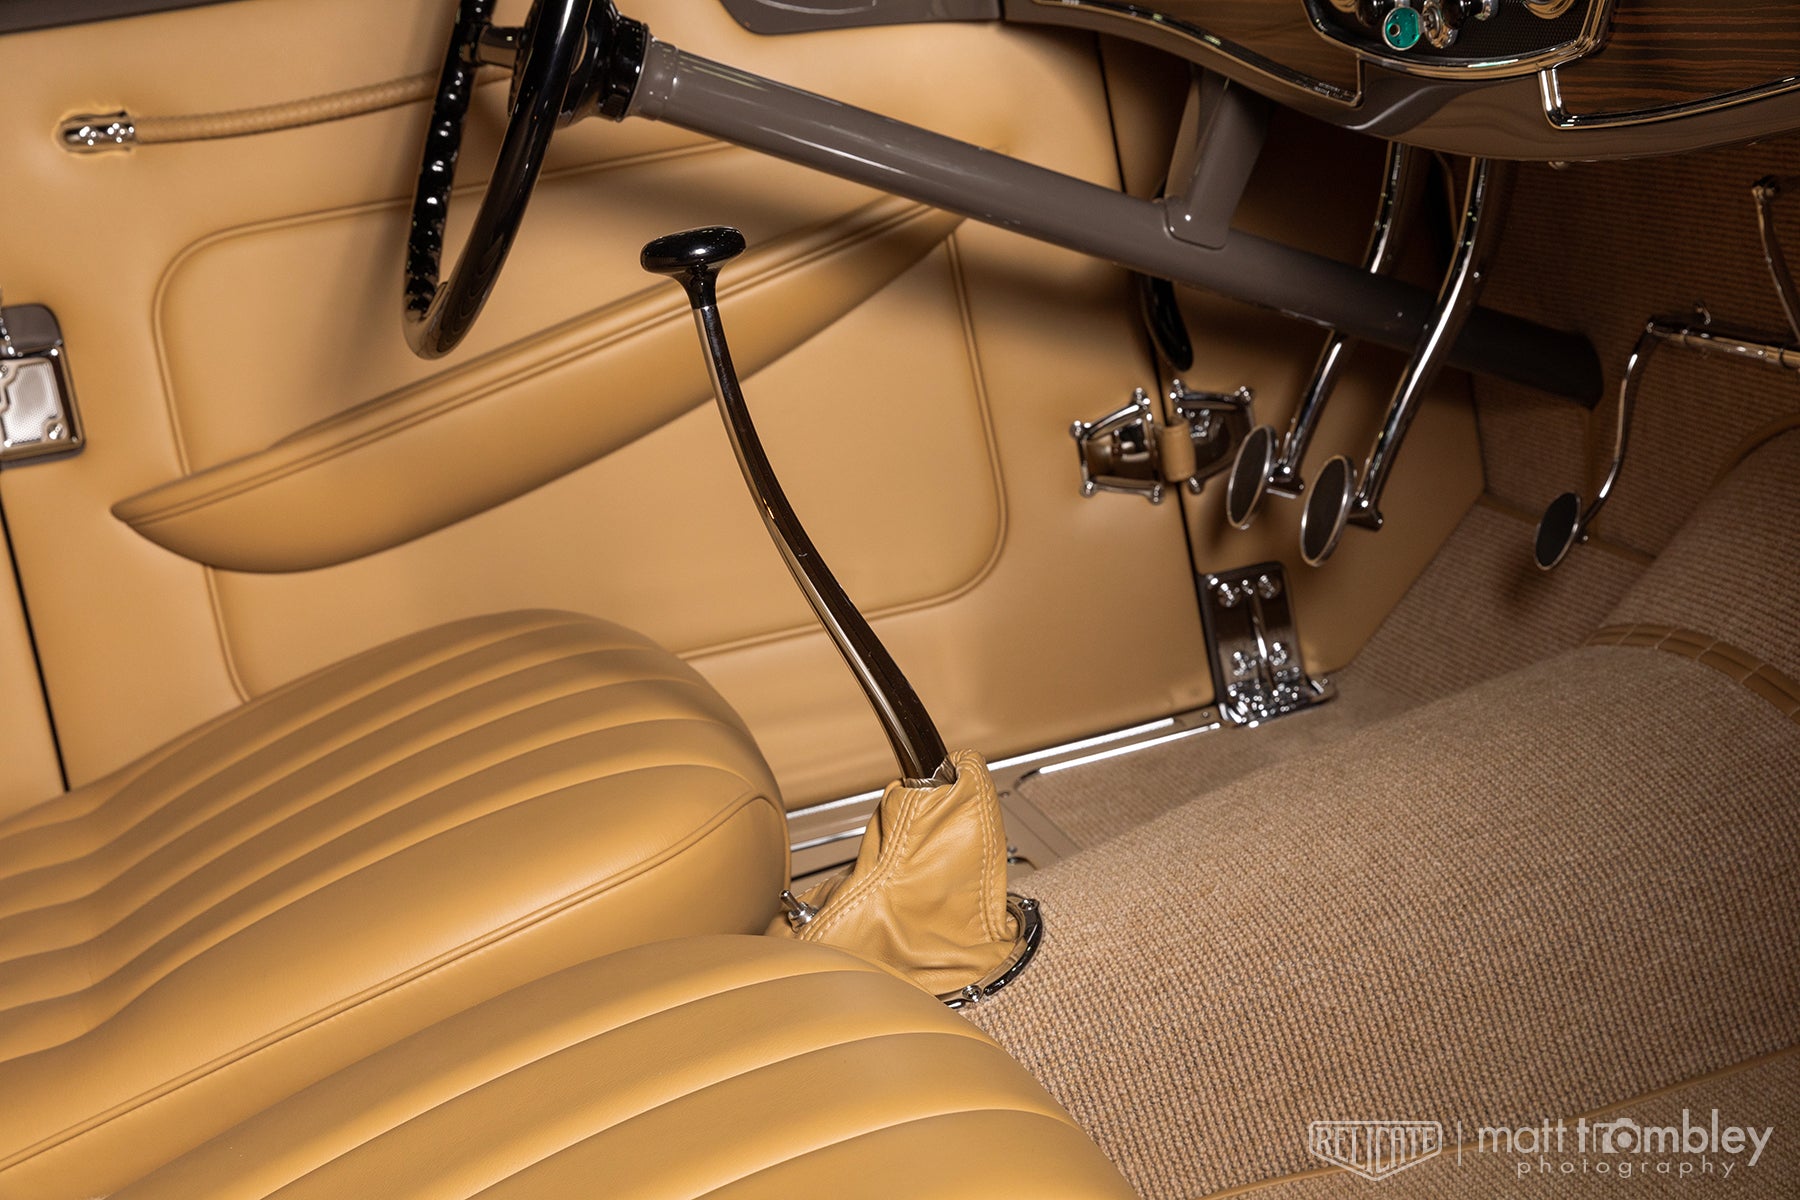 Relicate Leather Interior 1936 Ford "3 Penny Roadster" - George Poteet- 2019 AMBR Winner